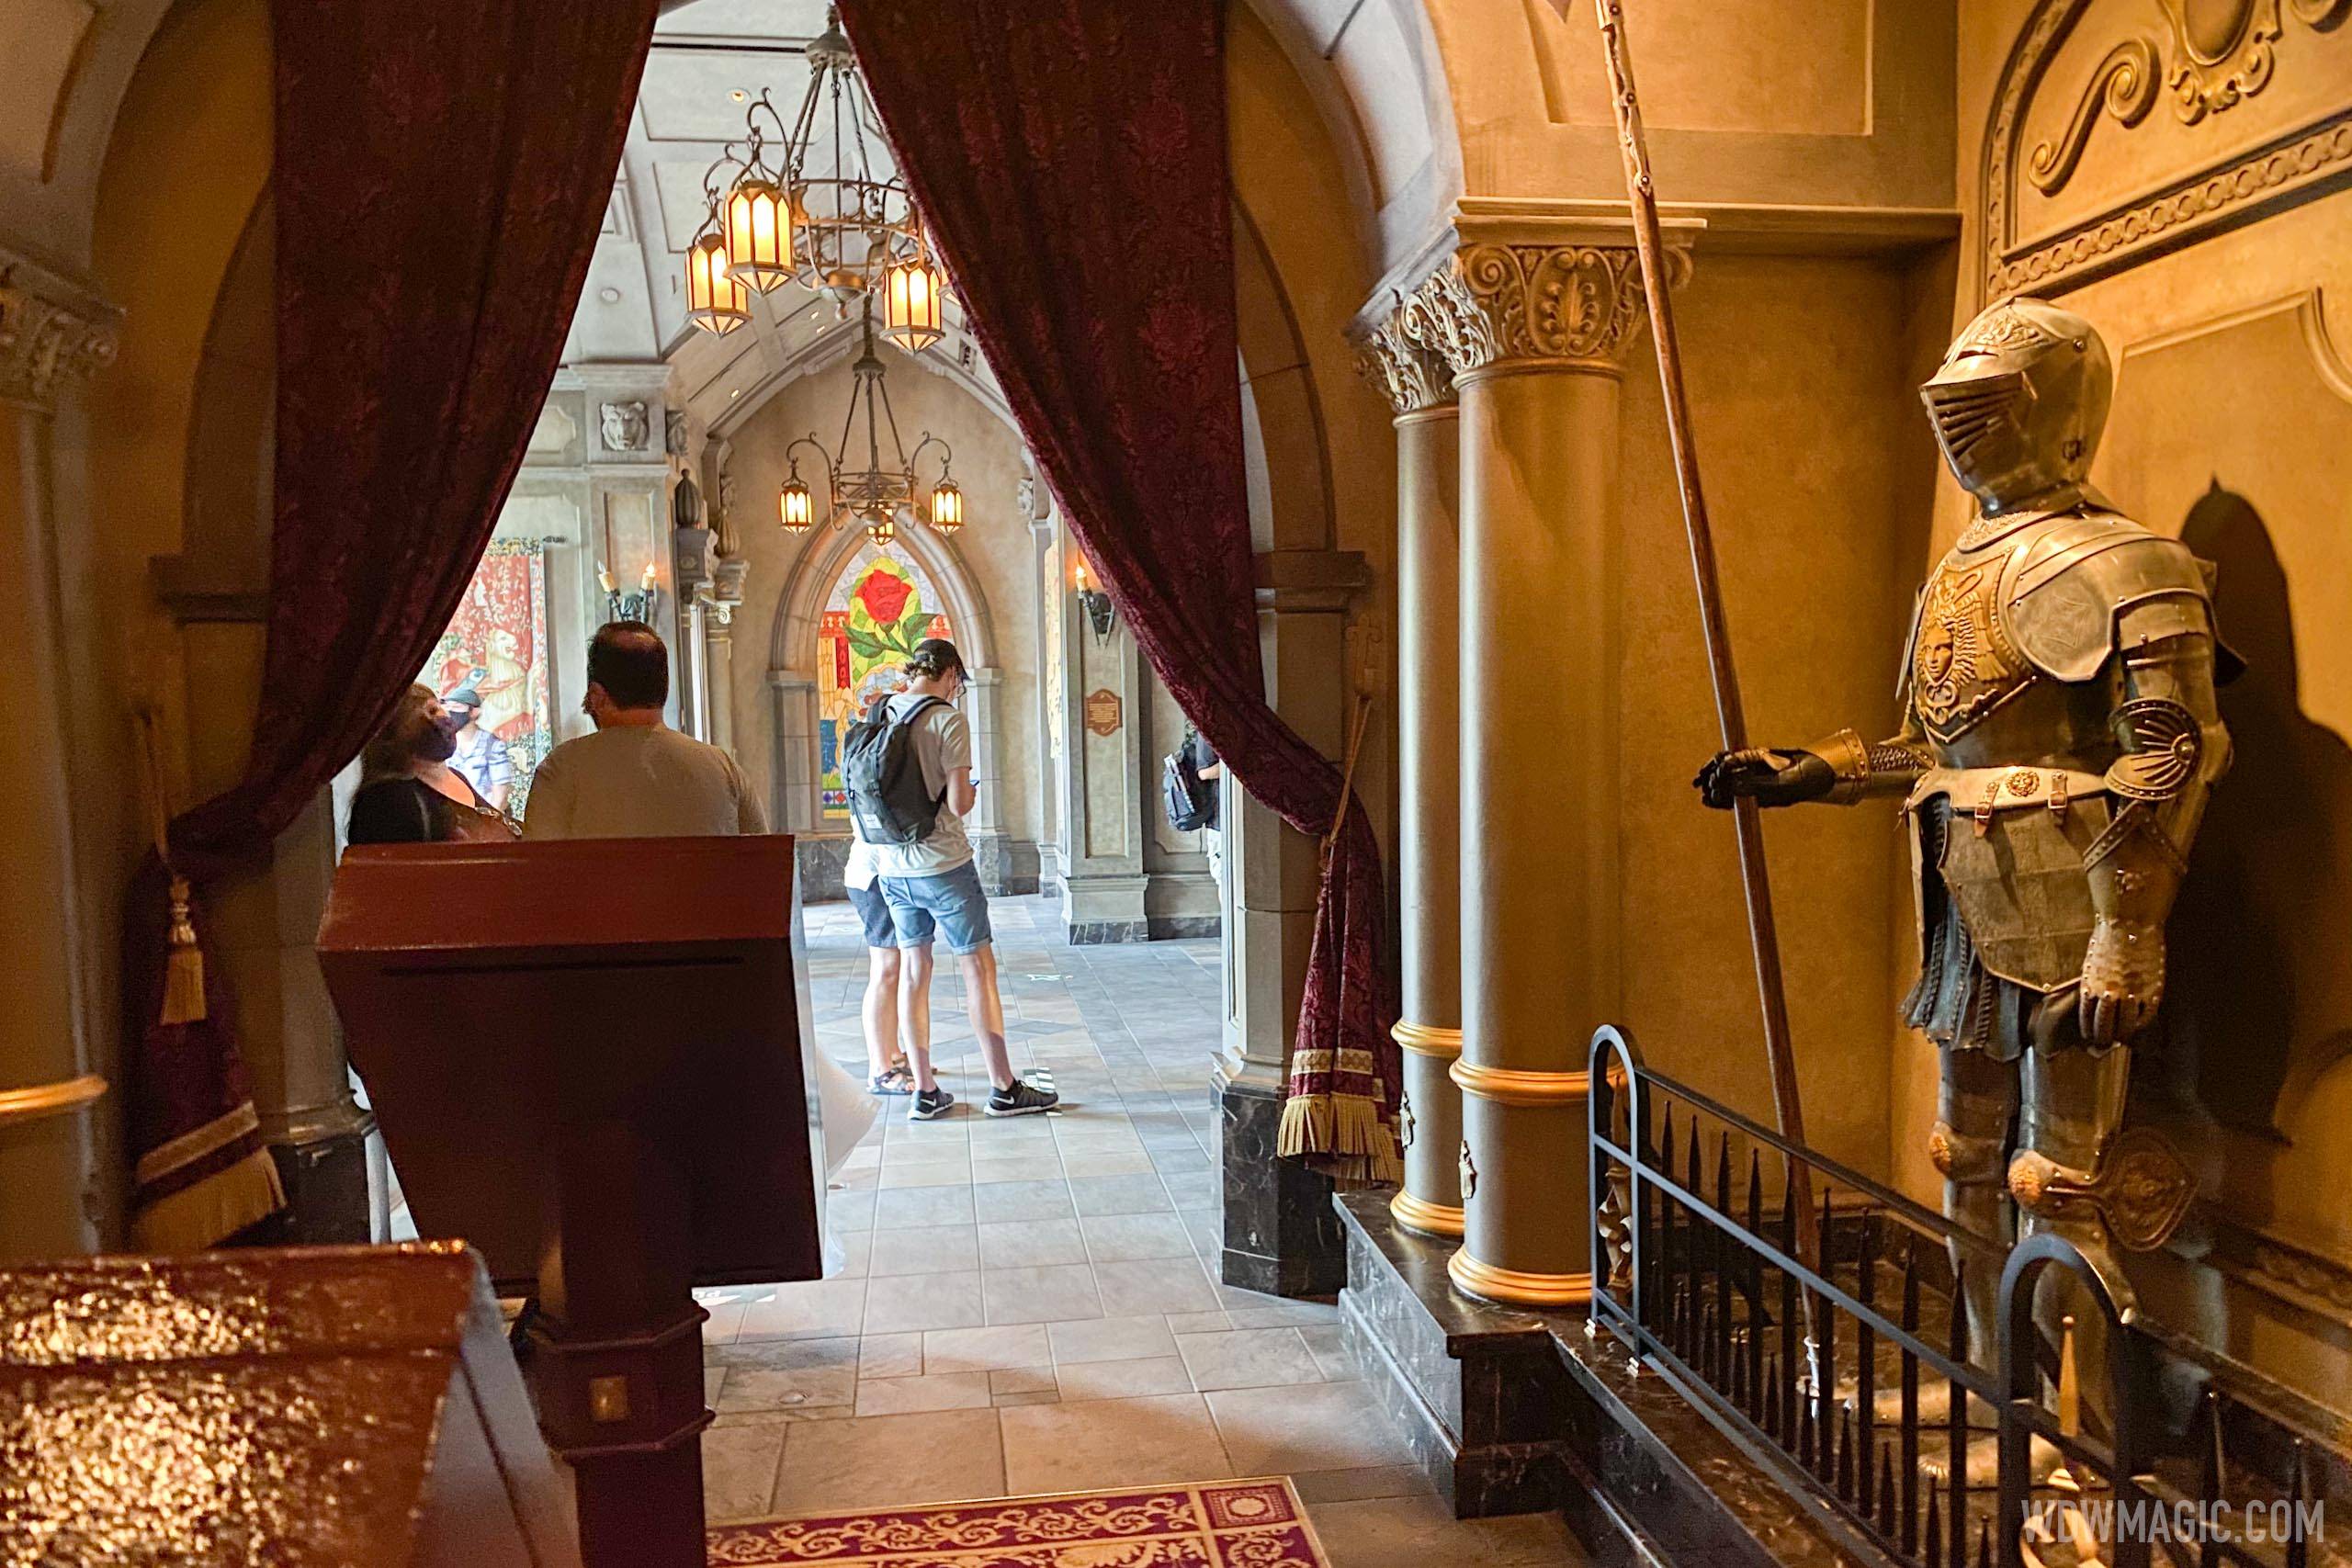 Social distancing extends inside the lobby of Be Our Guest